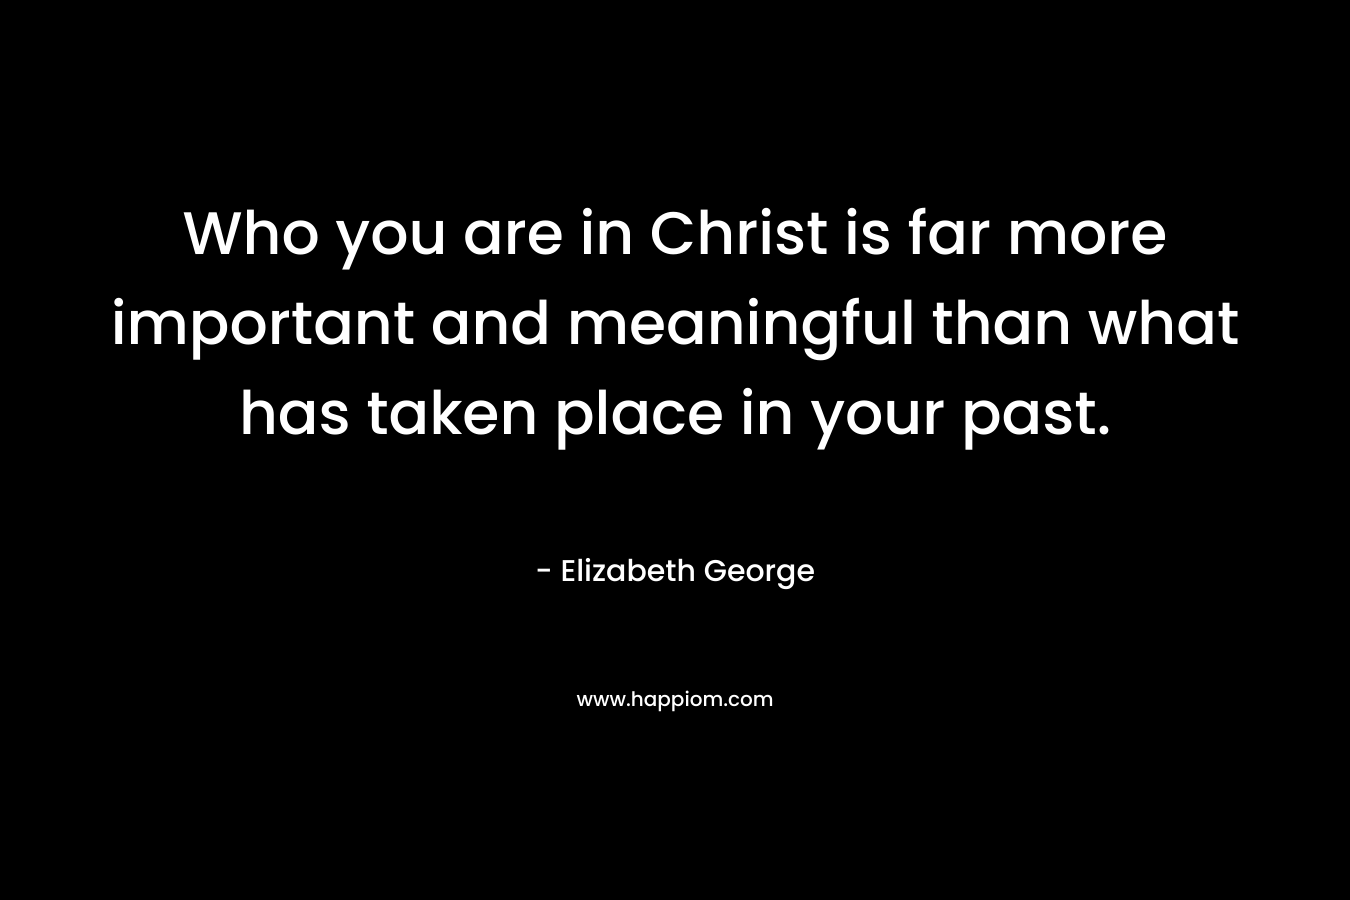 Who you are in Christ is far more important and meaningful than what has taken place in your past.